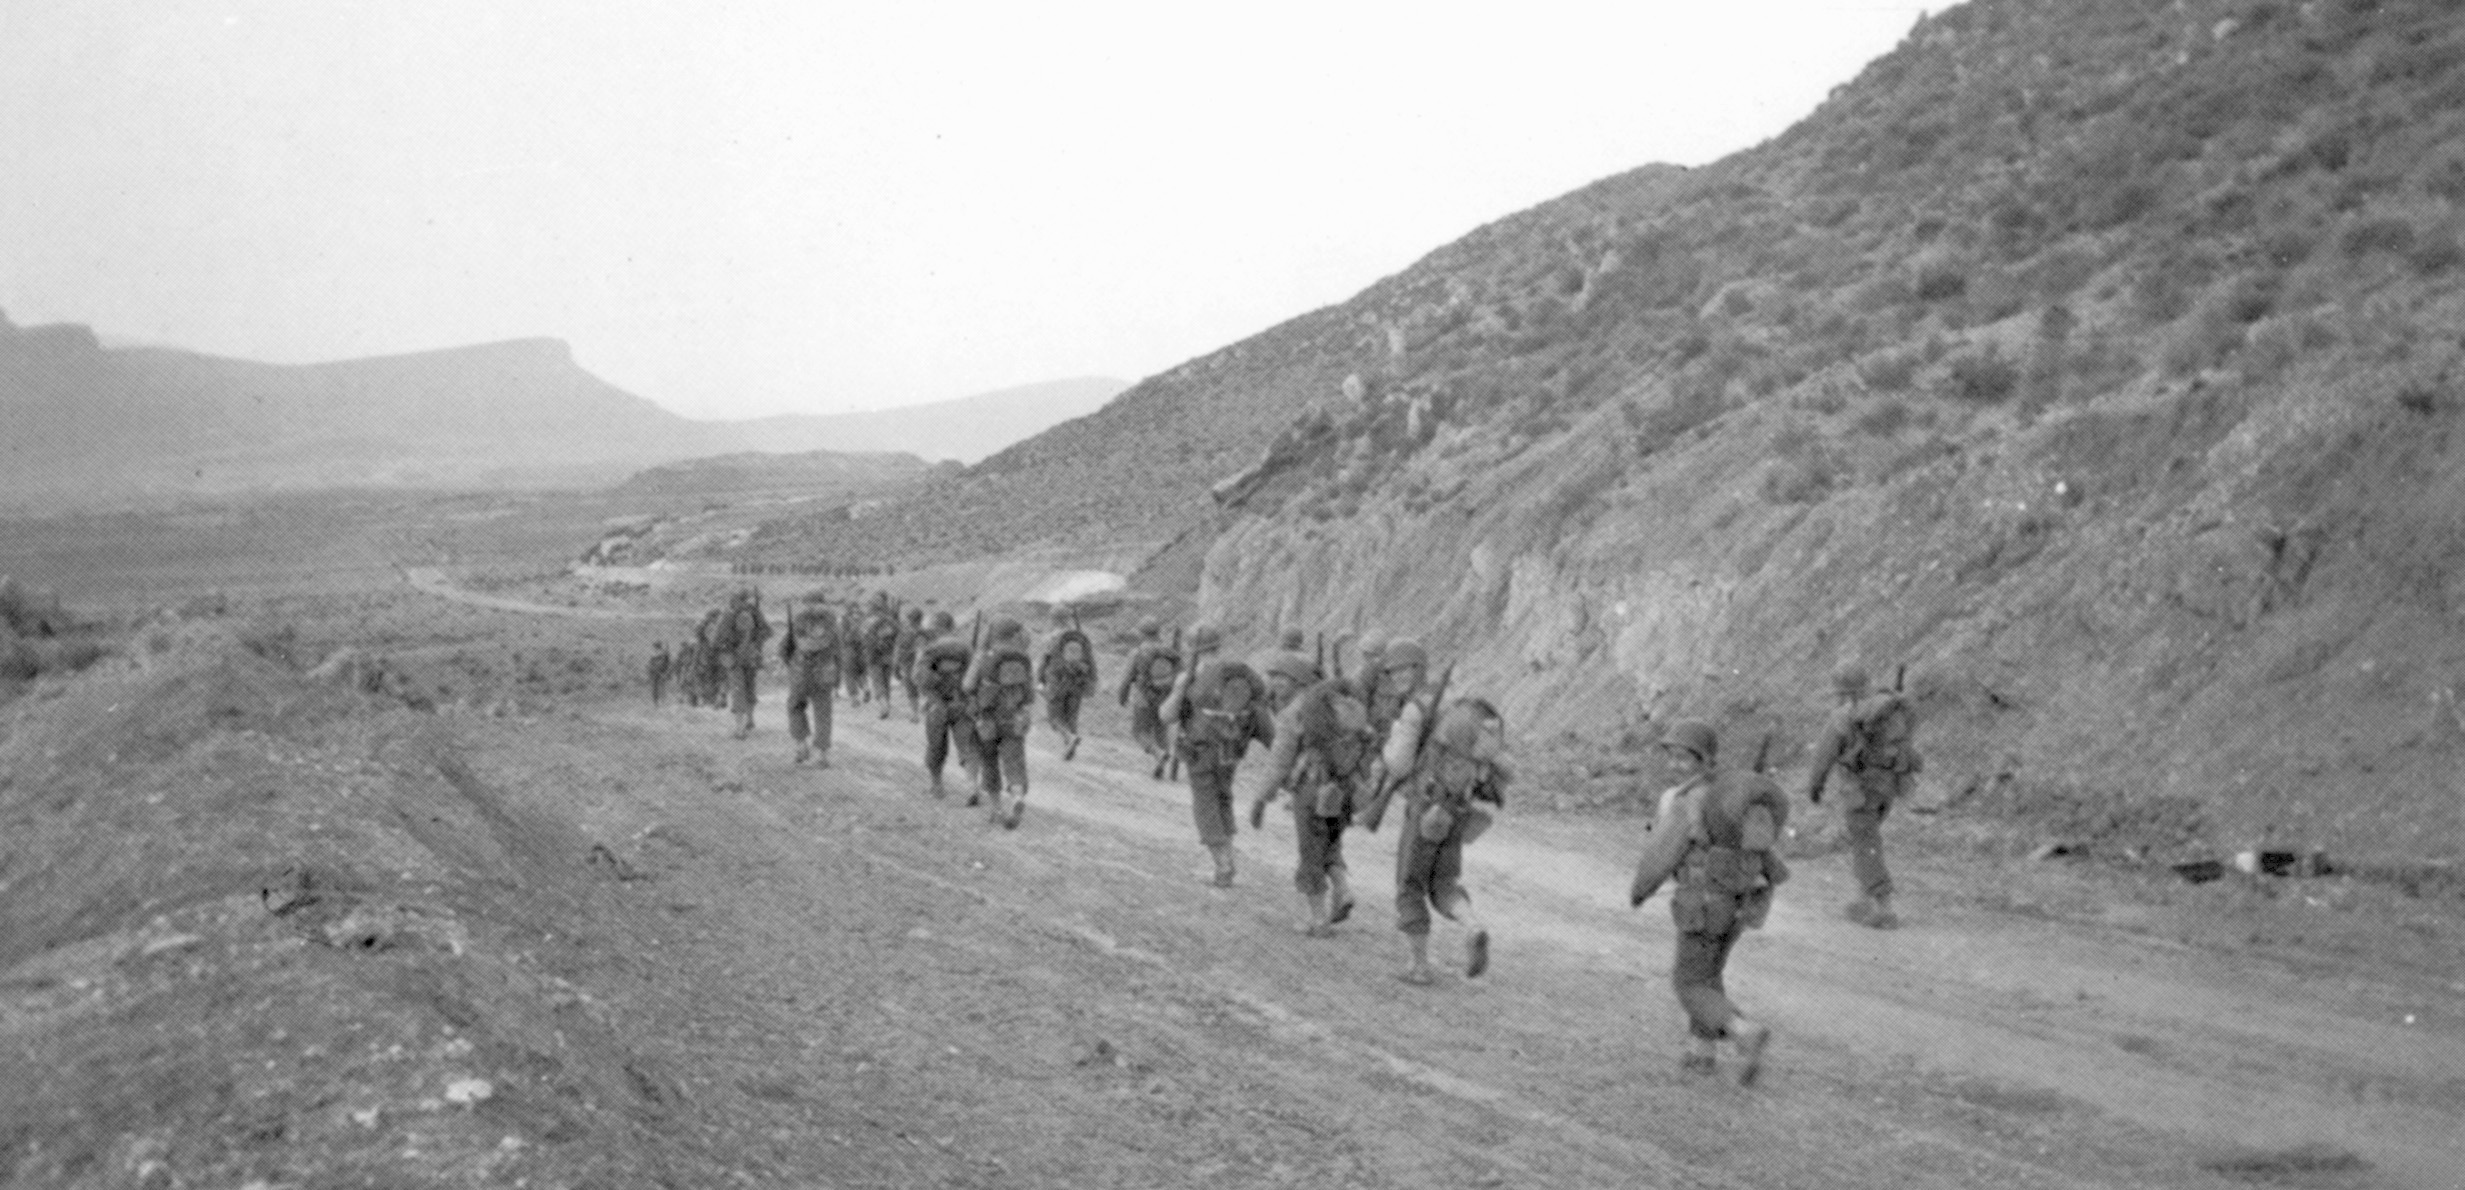 Westmoreland was with the 9th Infantry Division at Kasserine Pass in North Africa in 1943.